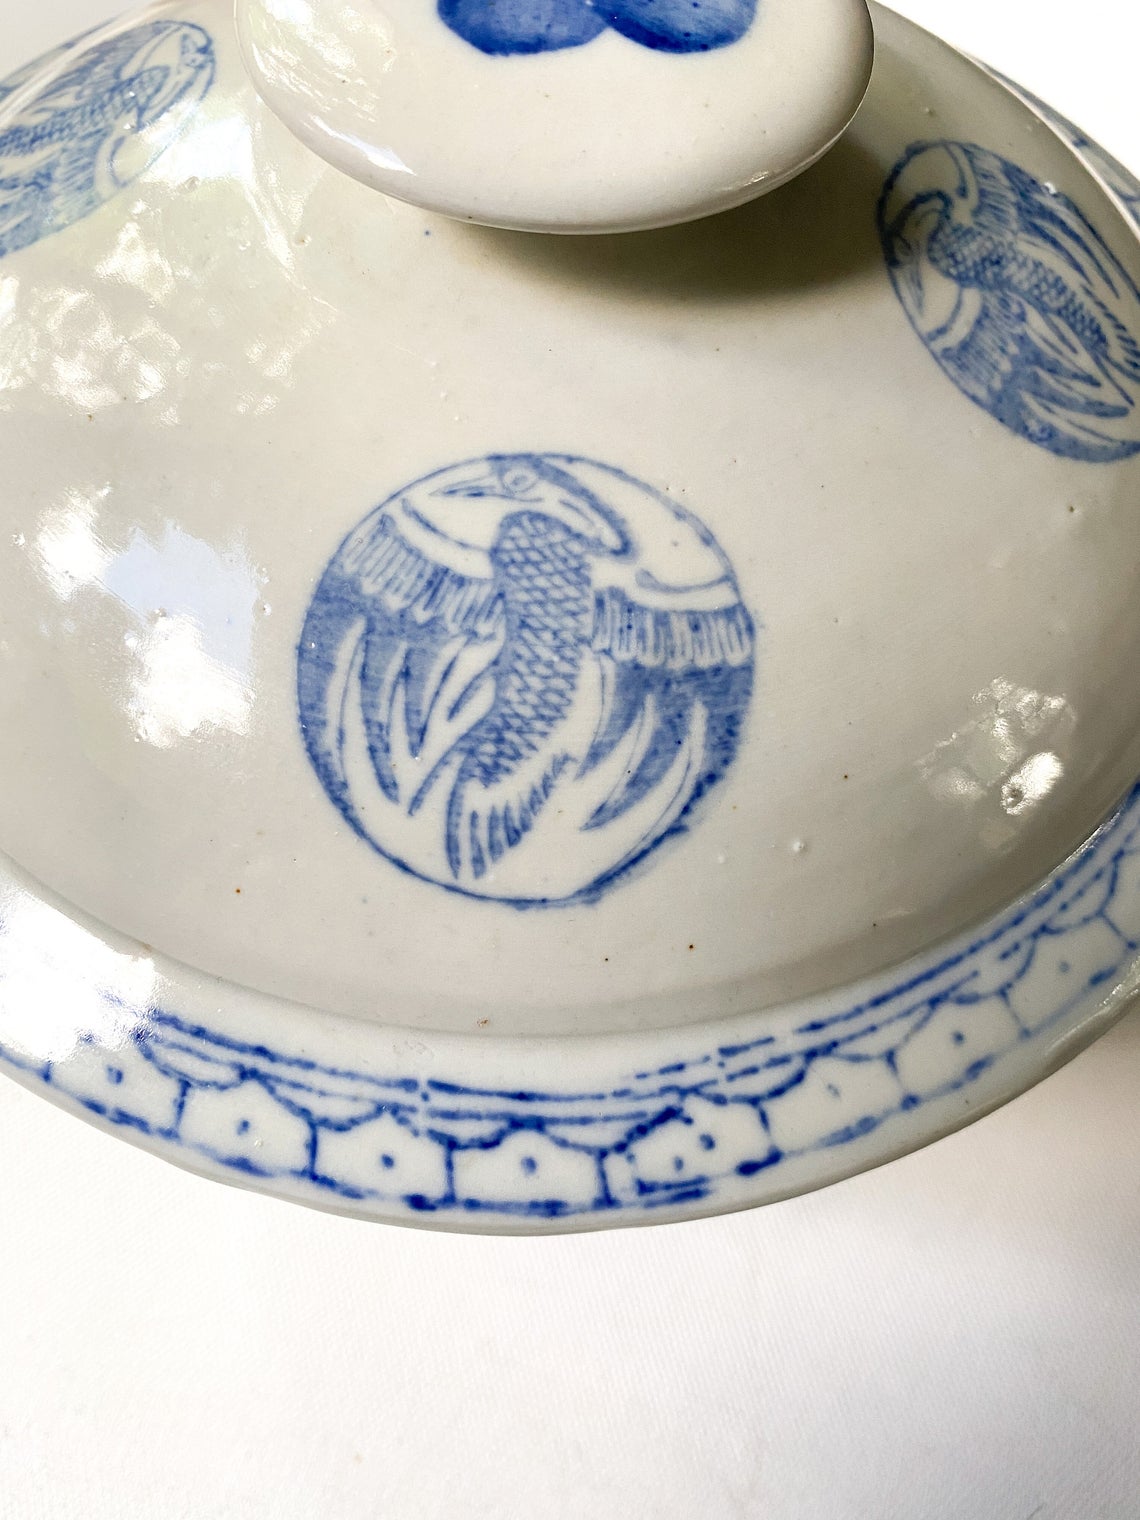 Vintage Blue and White Lidded Rice Bowl, Chinoserie